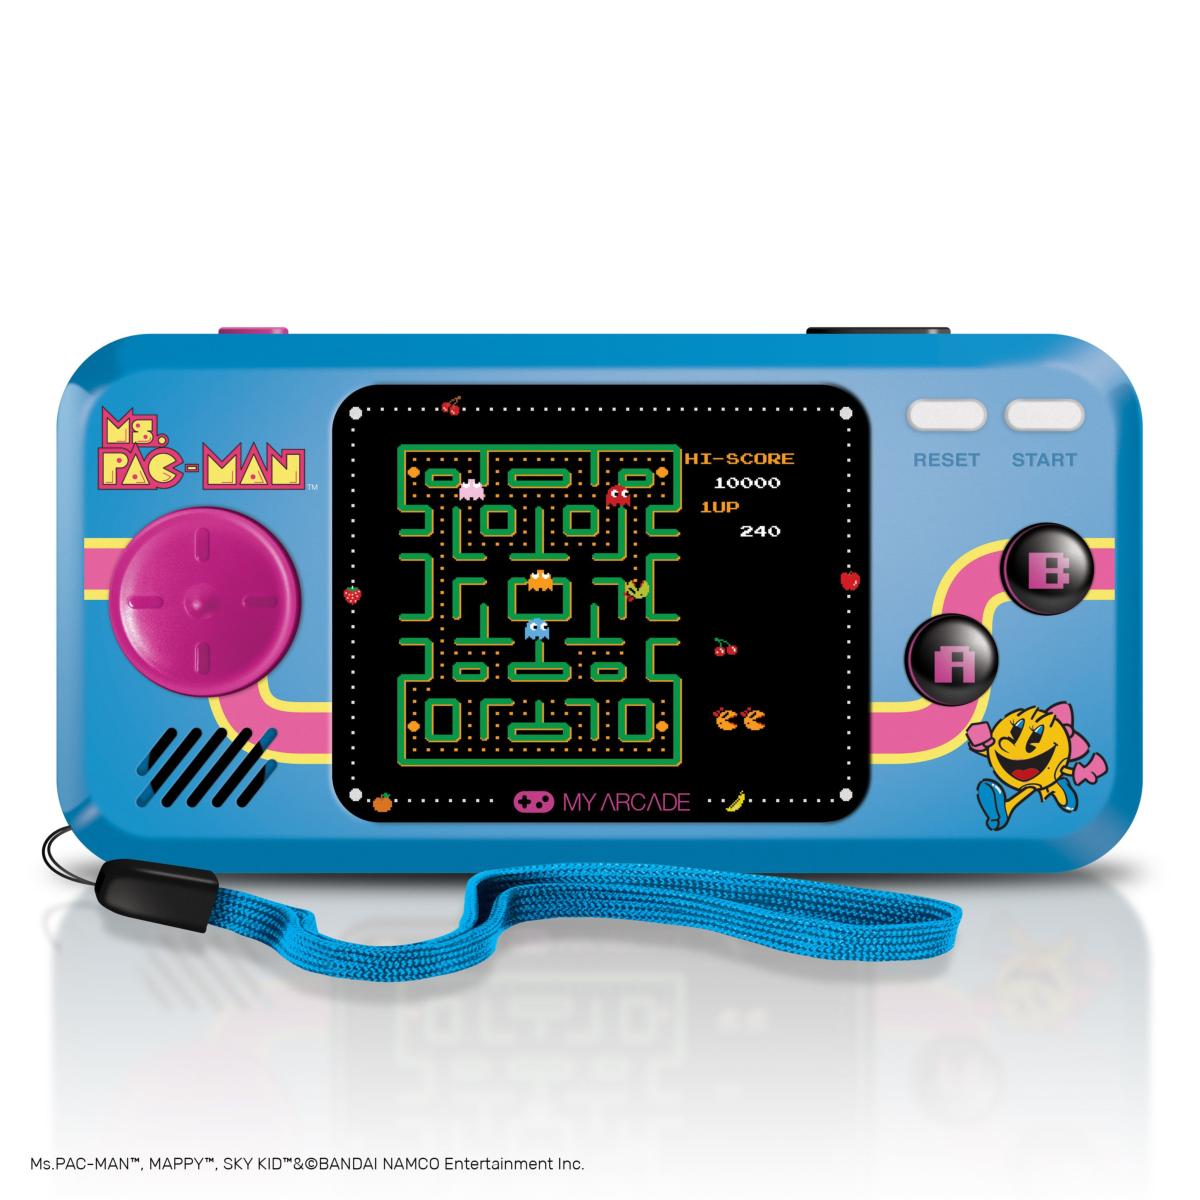 My arcade - Pocket Player Ms. Pac-Man - Portable Gaming - 3 Games in 1